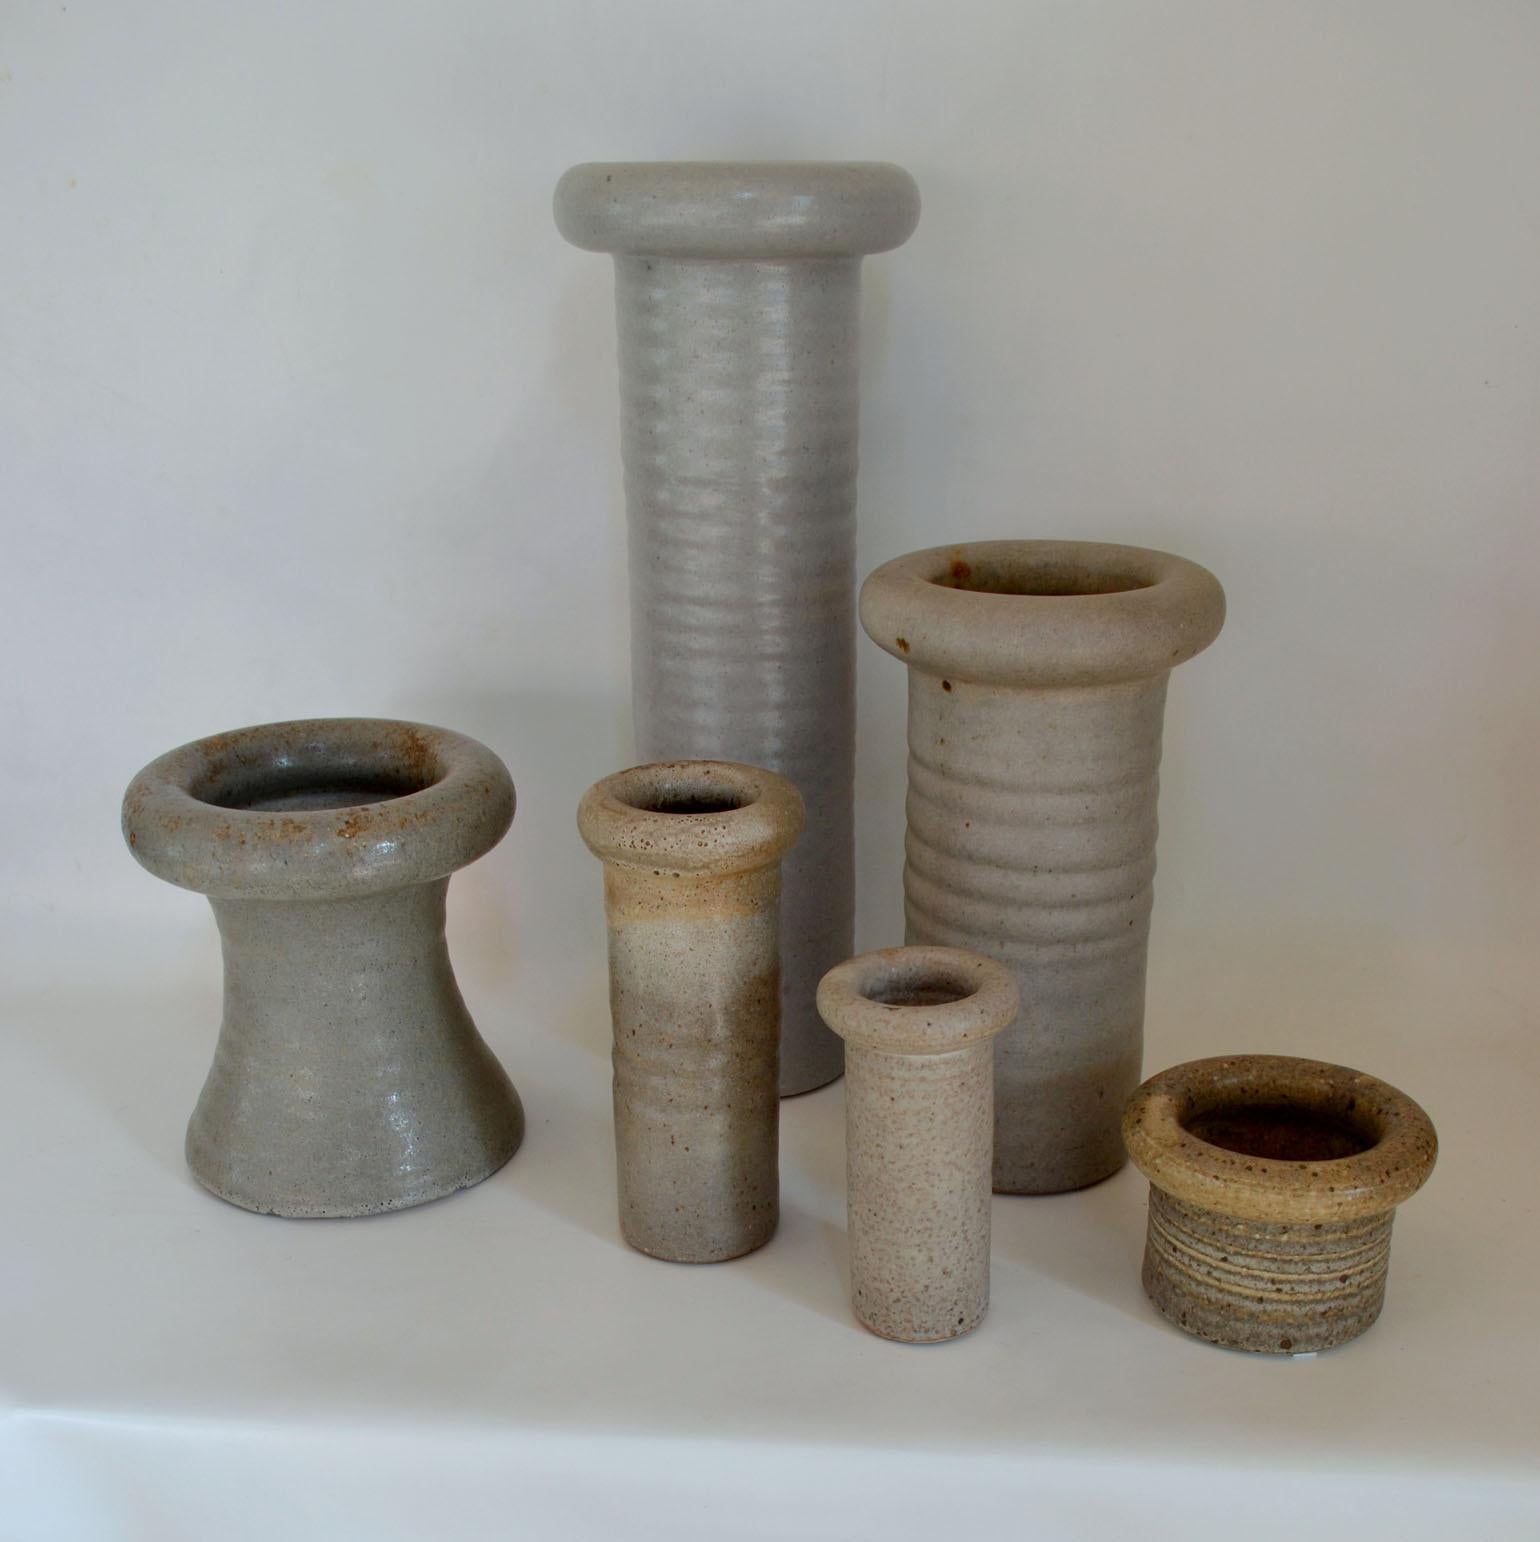 Six cylinder Studio Pottery vases of various heights in white tones created on the turning wheel by the highly technical skilled Dutch ceramist Piet Knepper. At Mobach studio were made in the late 1960s and 1970s. Knepper gave a new twist to the